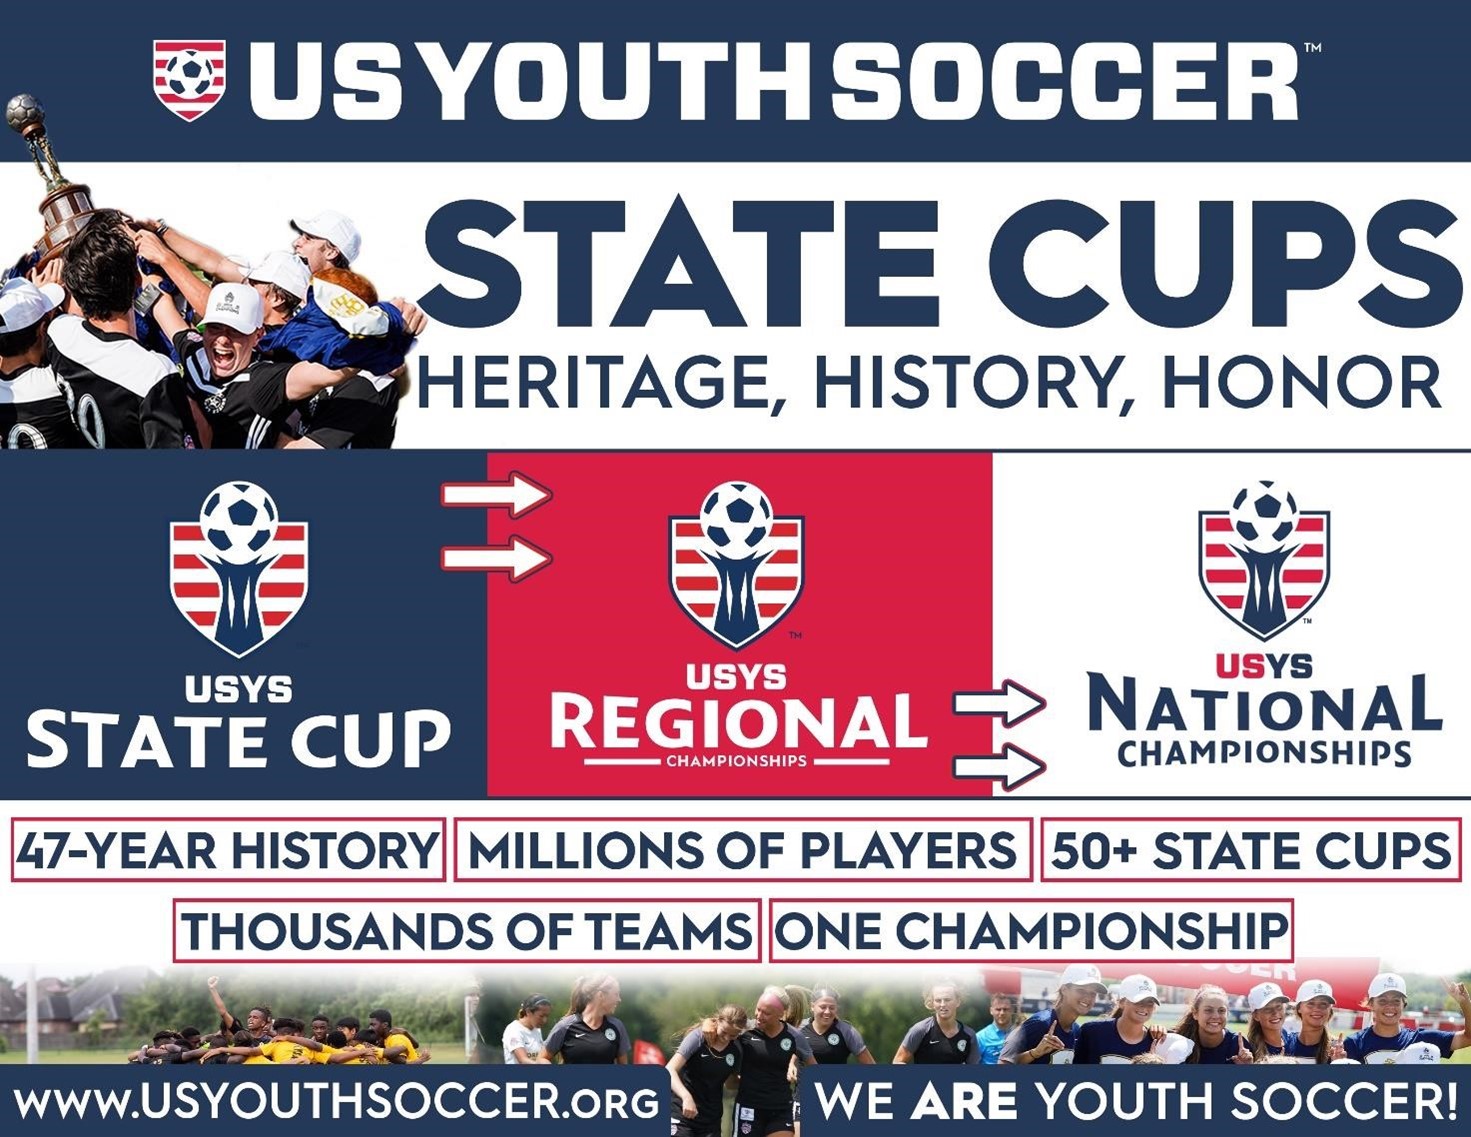 https://oregonyouthsoccer.org/wp-content/uploads/2021/04/usys-state-cup.jpg